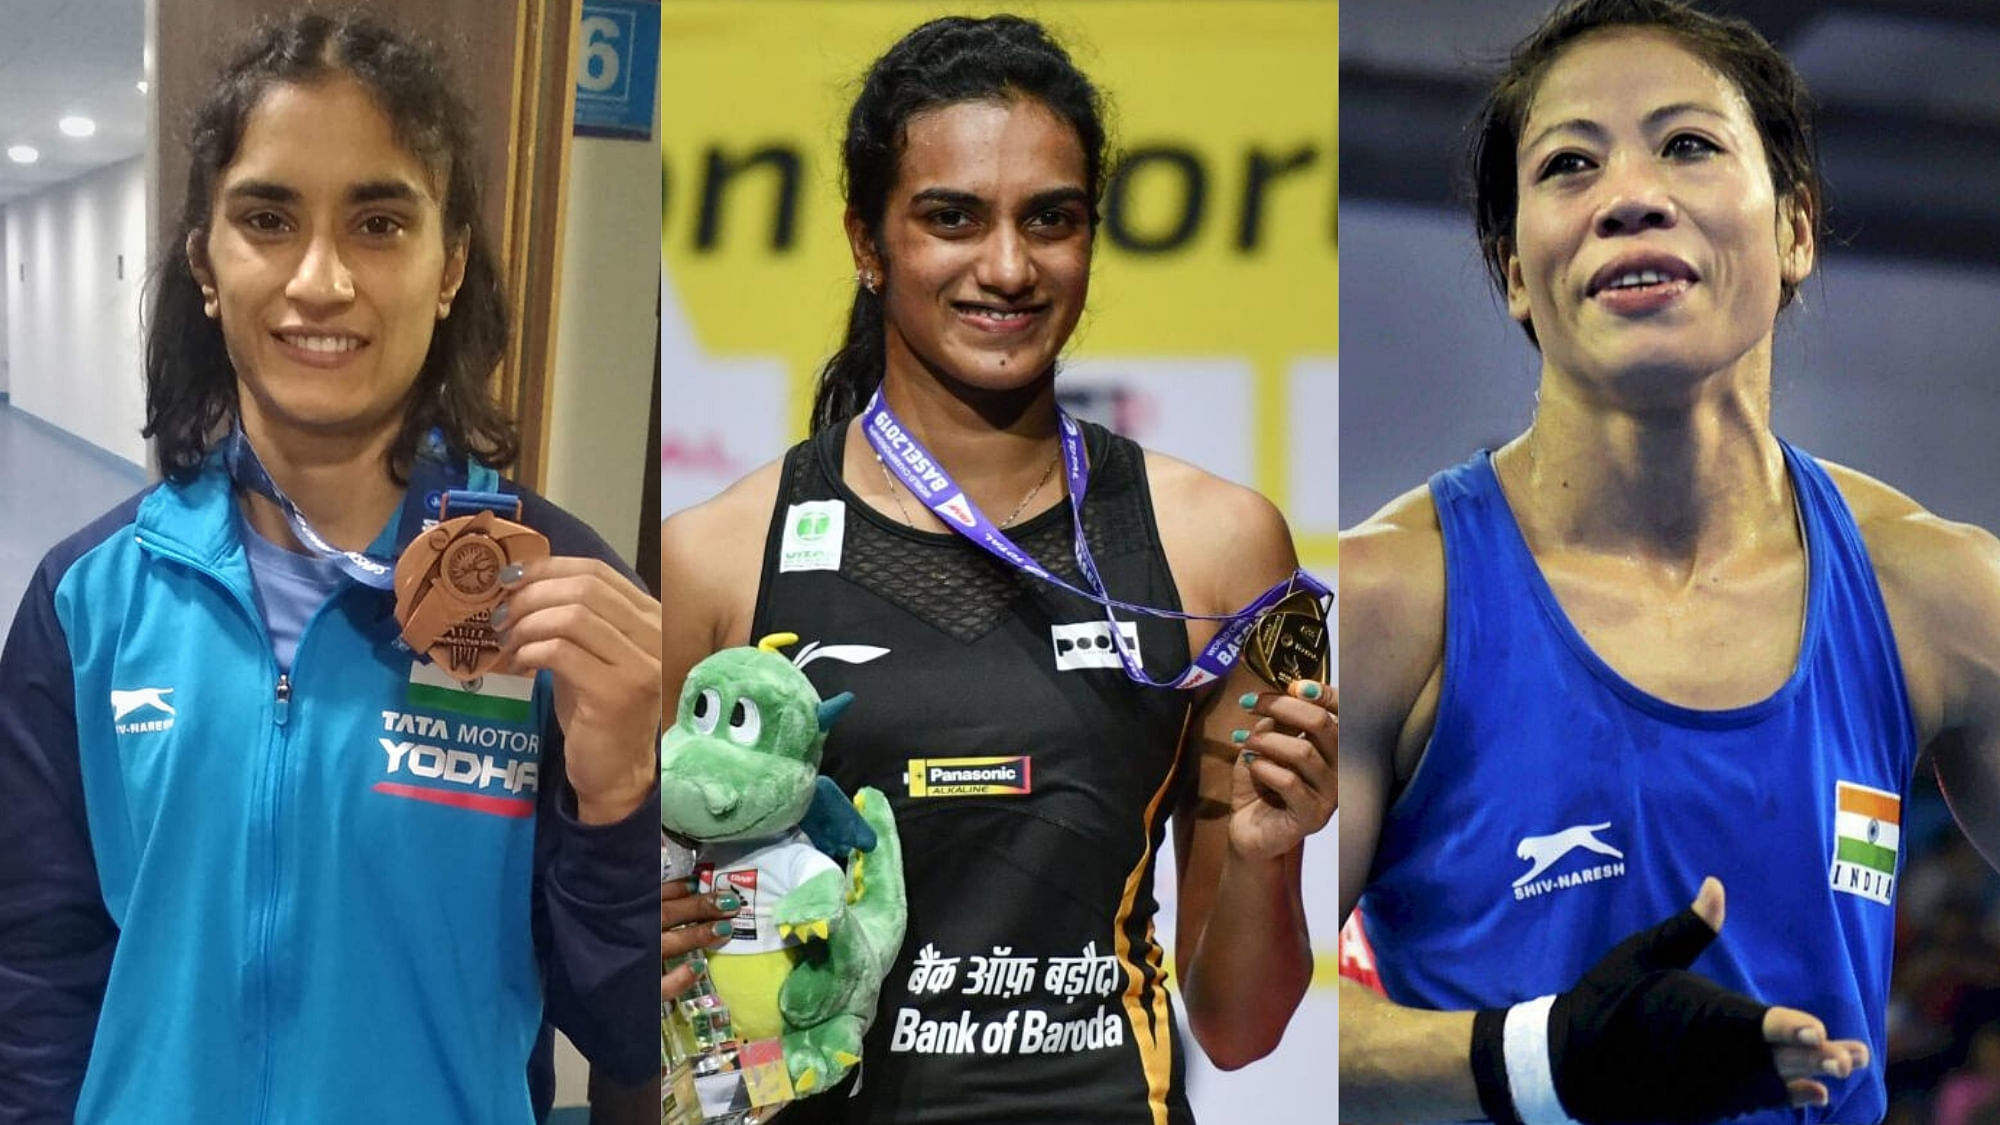 Sprinter Dutee Chand and para-badminton player Manasi Joshi are the other nominees for the award, the winner of which will be announced on 8 March.